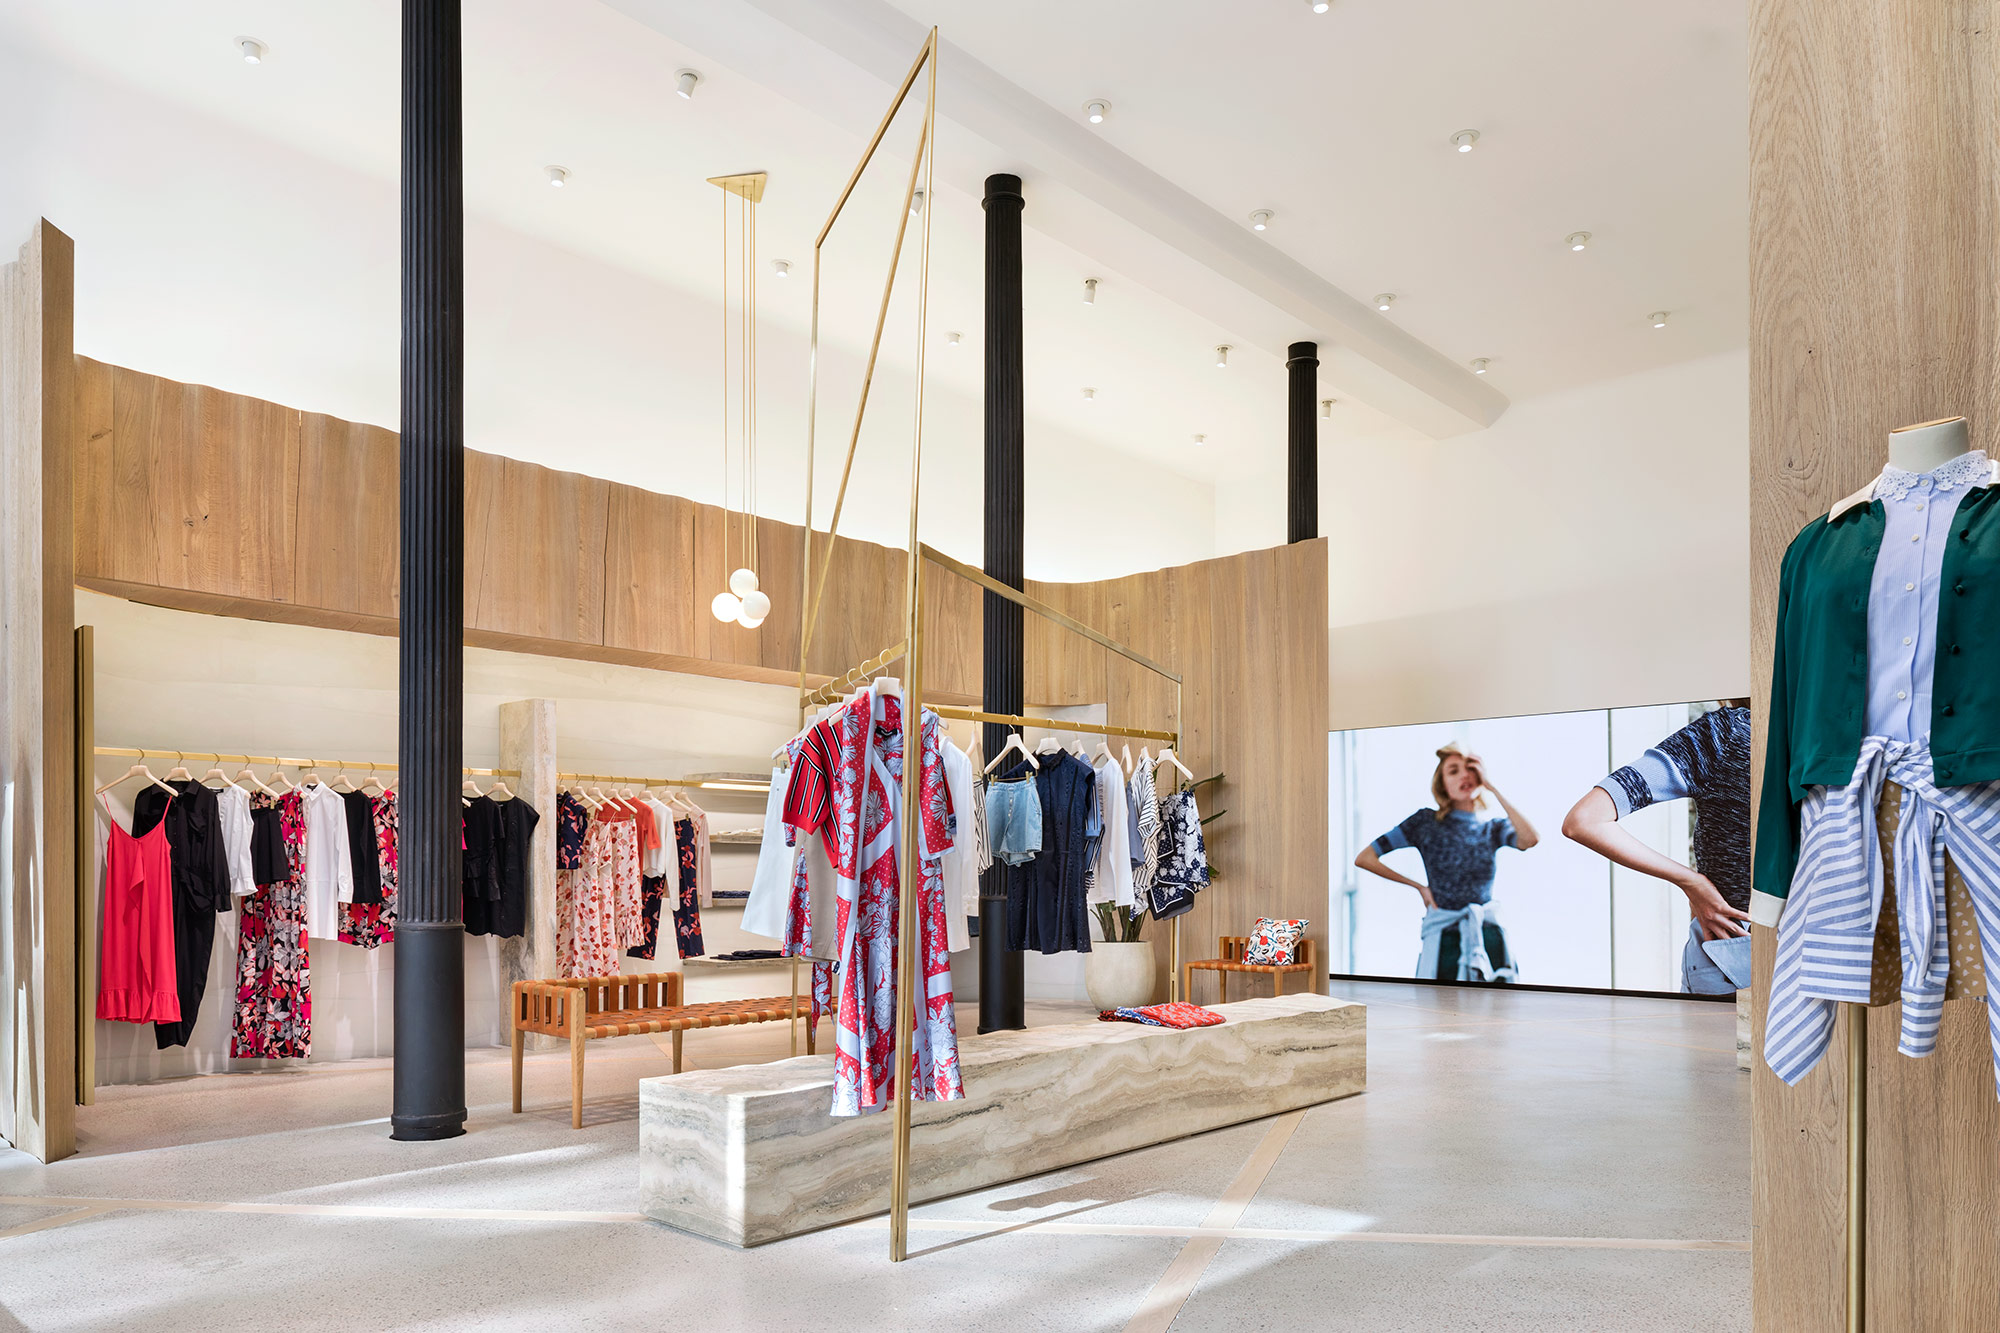 SHoP_Thakoon_Interior-with-screen_James-Ewing-Photography - Archpaper ...